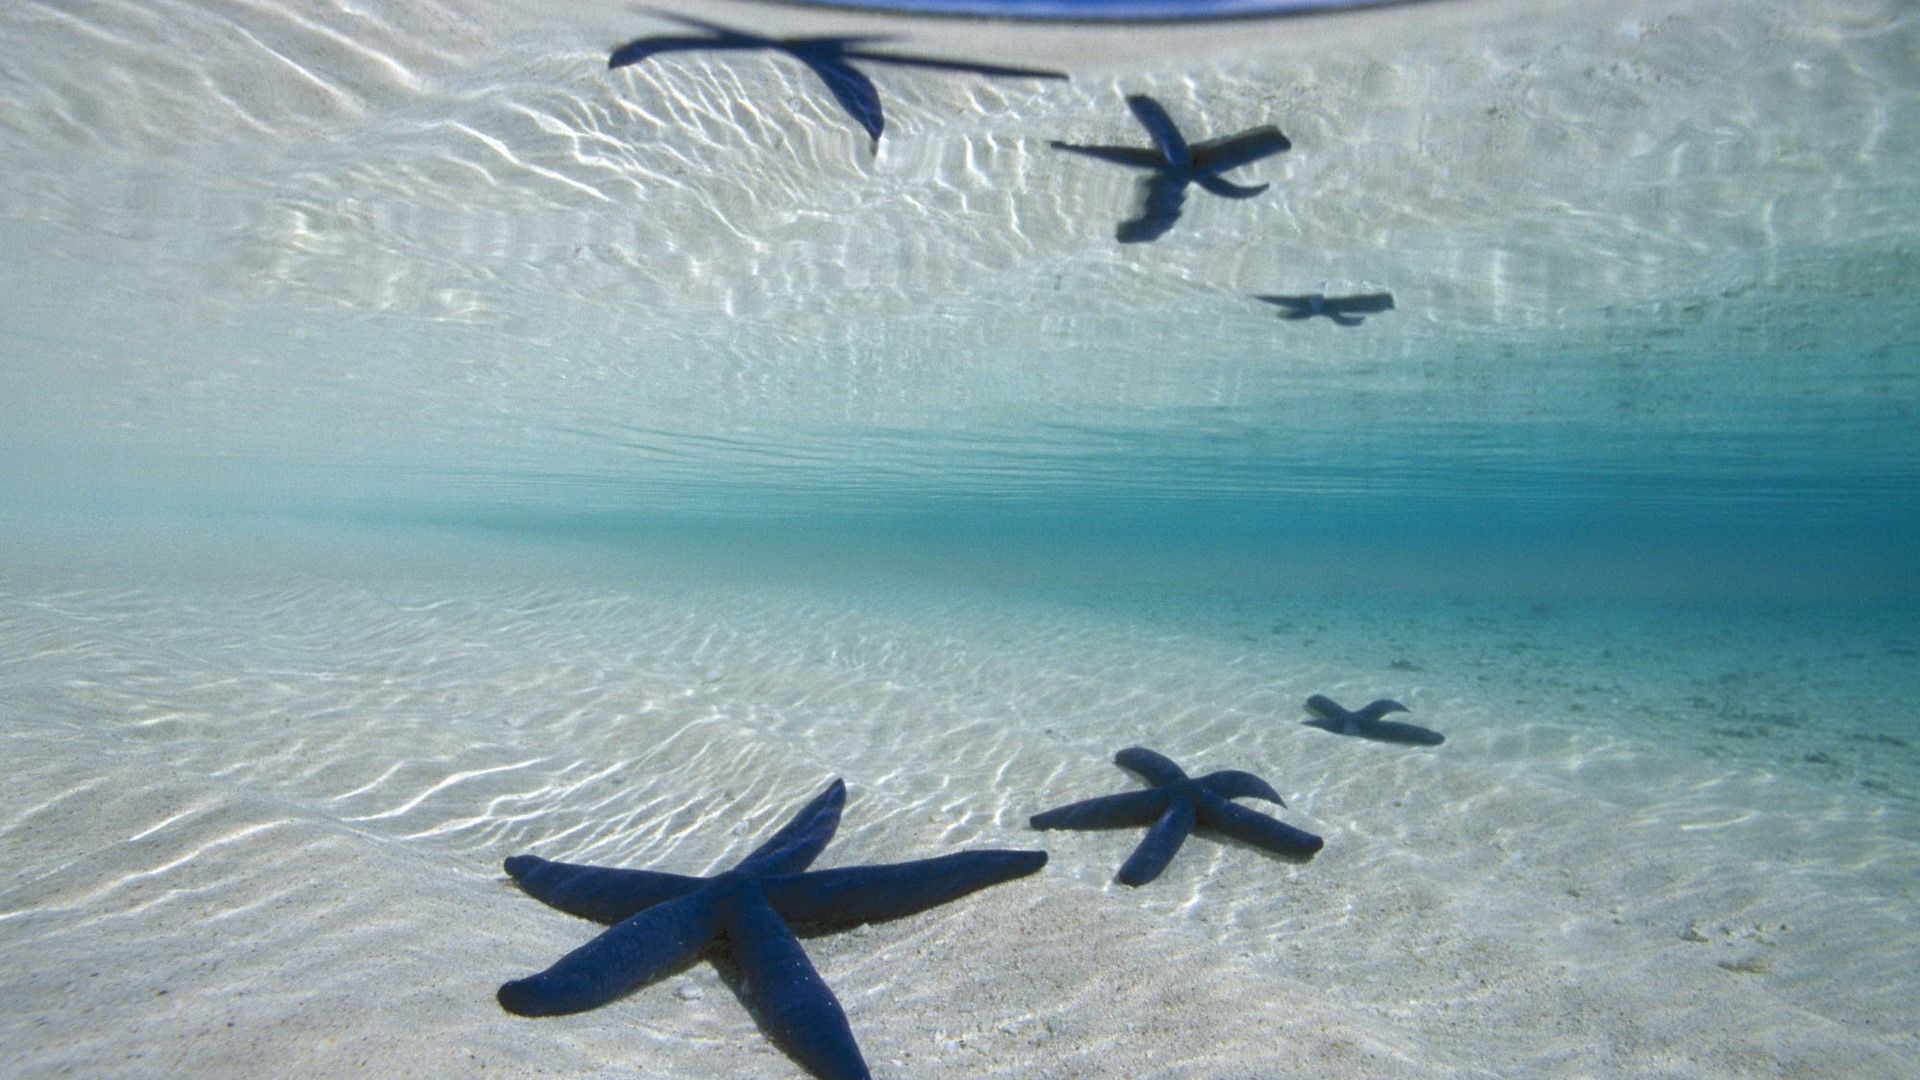 A group of starfish in the ocean - Starfish